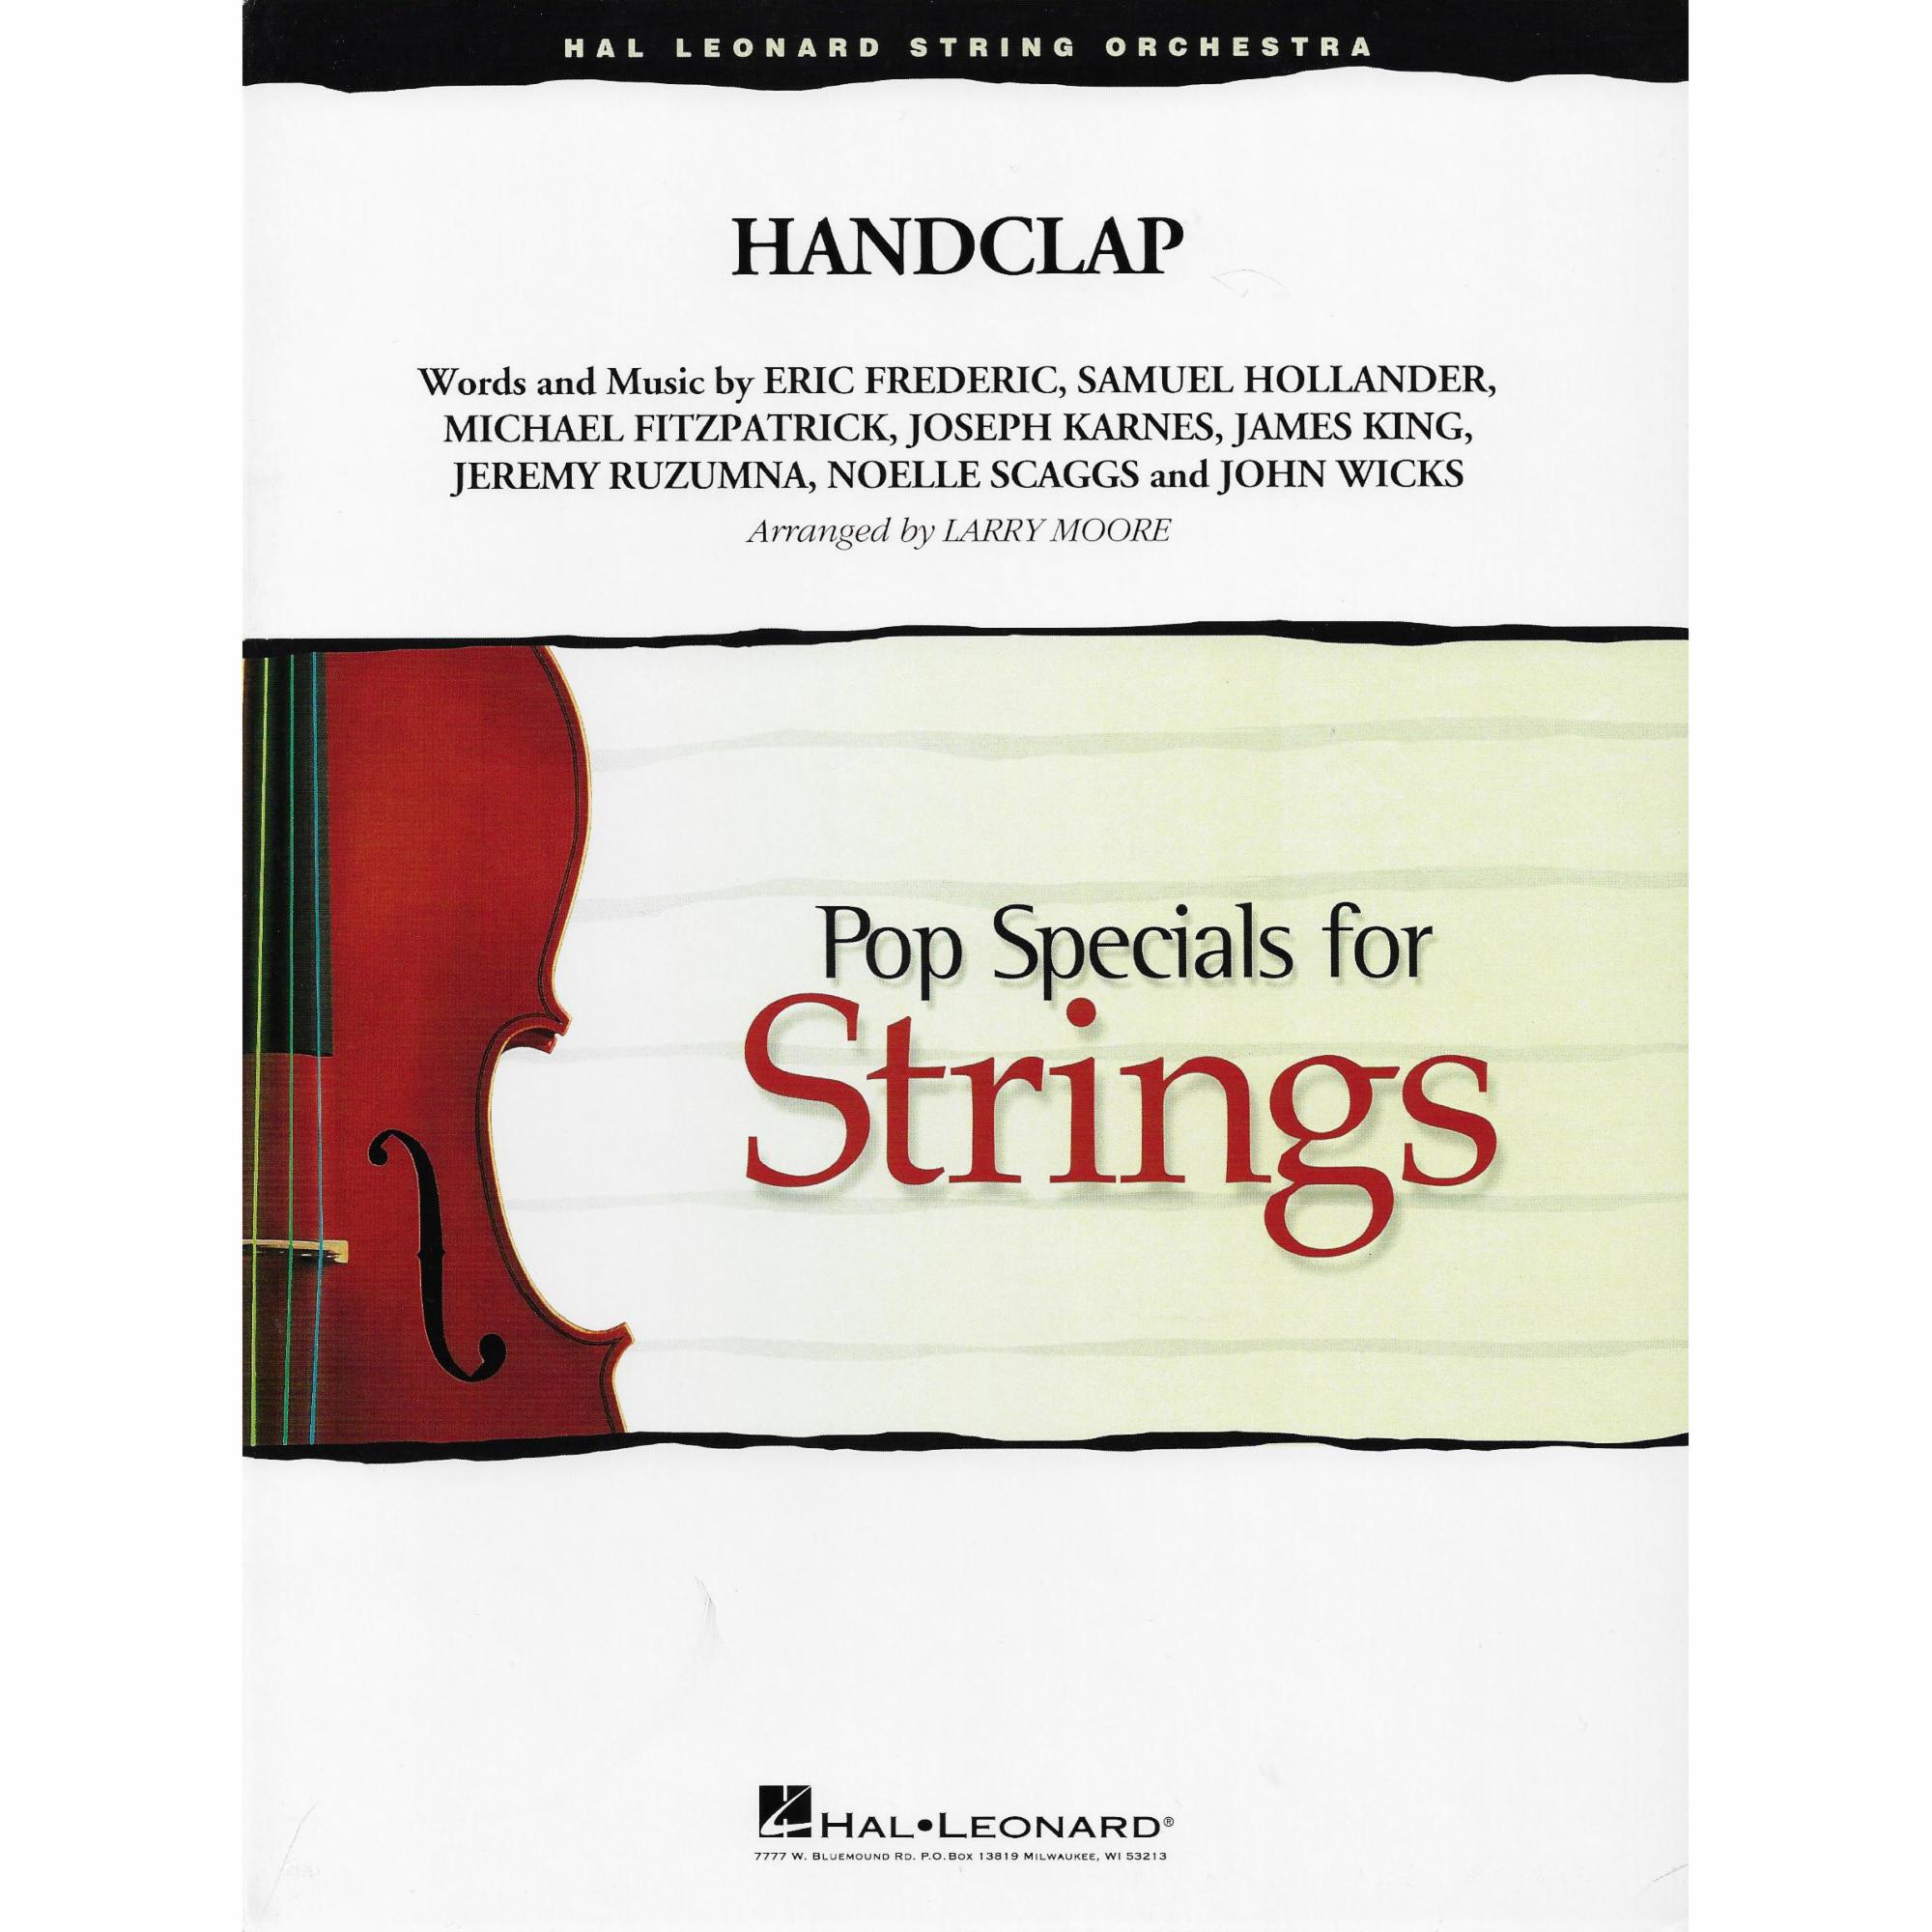 Handclap for String Orchestra